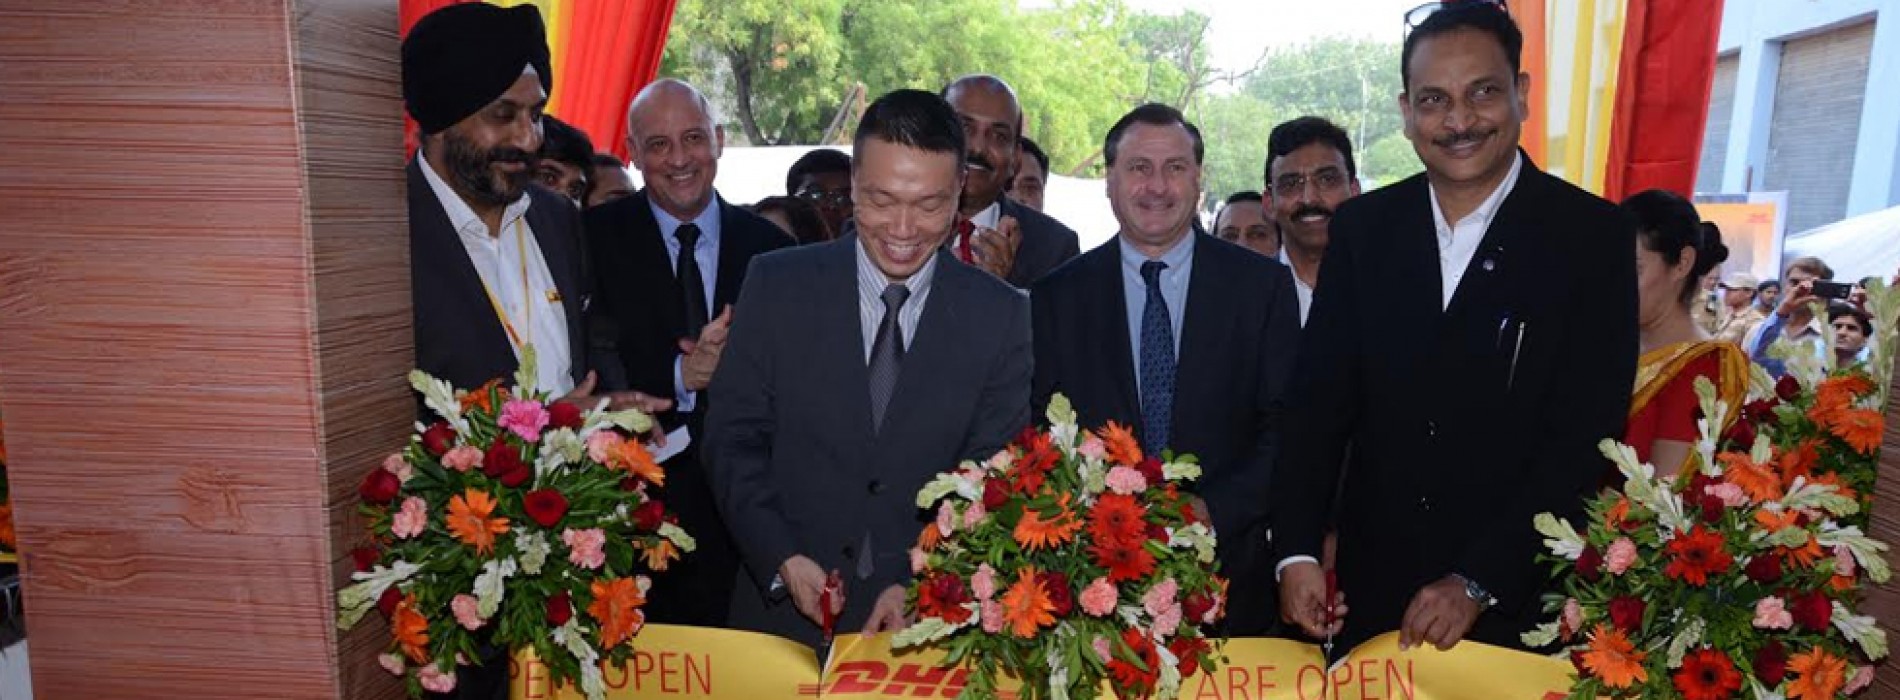 DHL Express inaugurates its expanded Delhi Gateway, doubling India’s export capacity